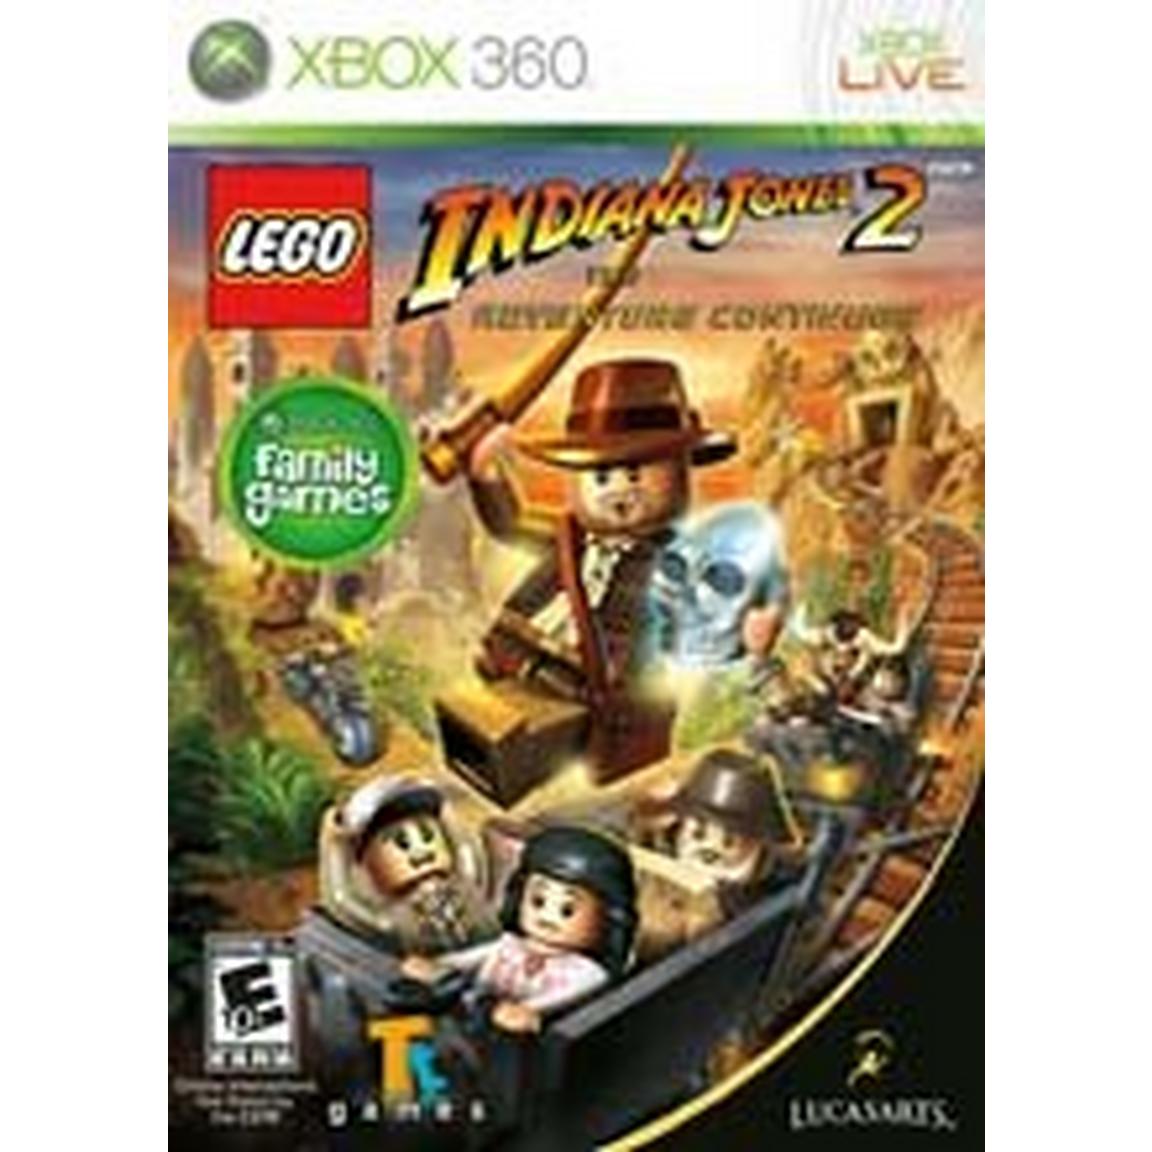 LEGO Indiana Jones 2: The Adventure Continues - Xbox 360, Pre-Owned -  LucasArts